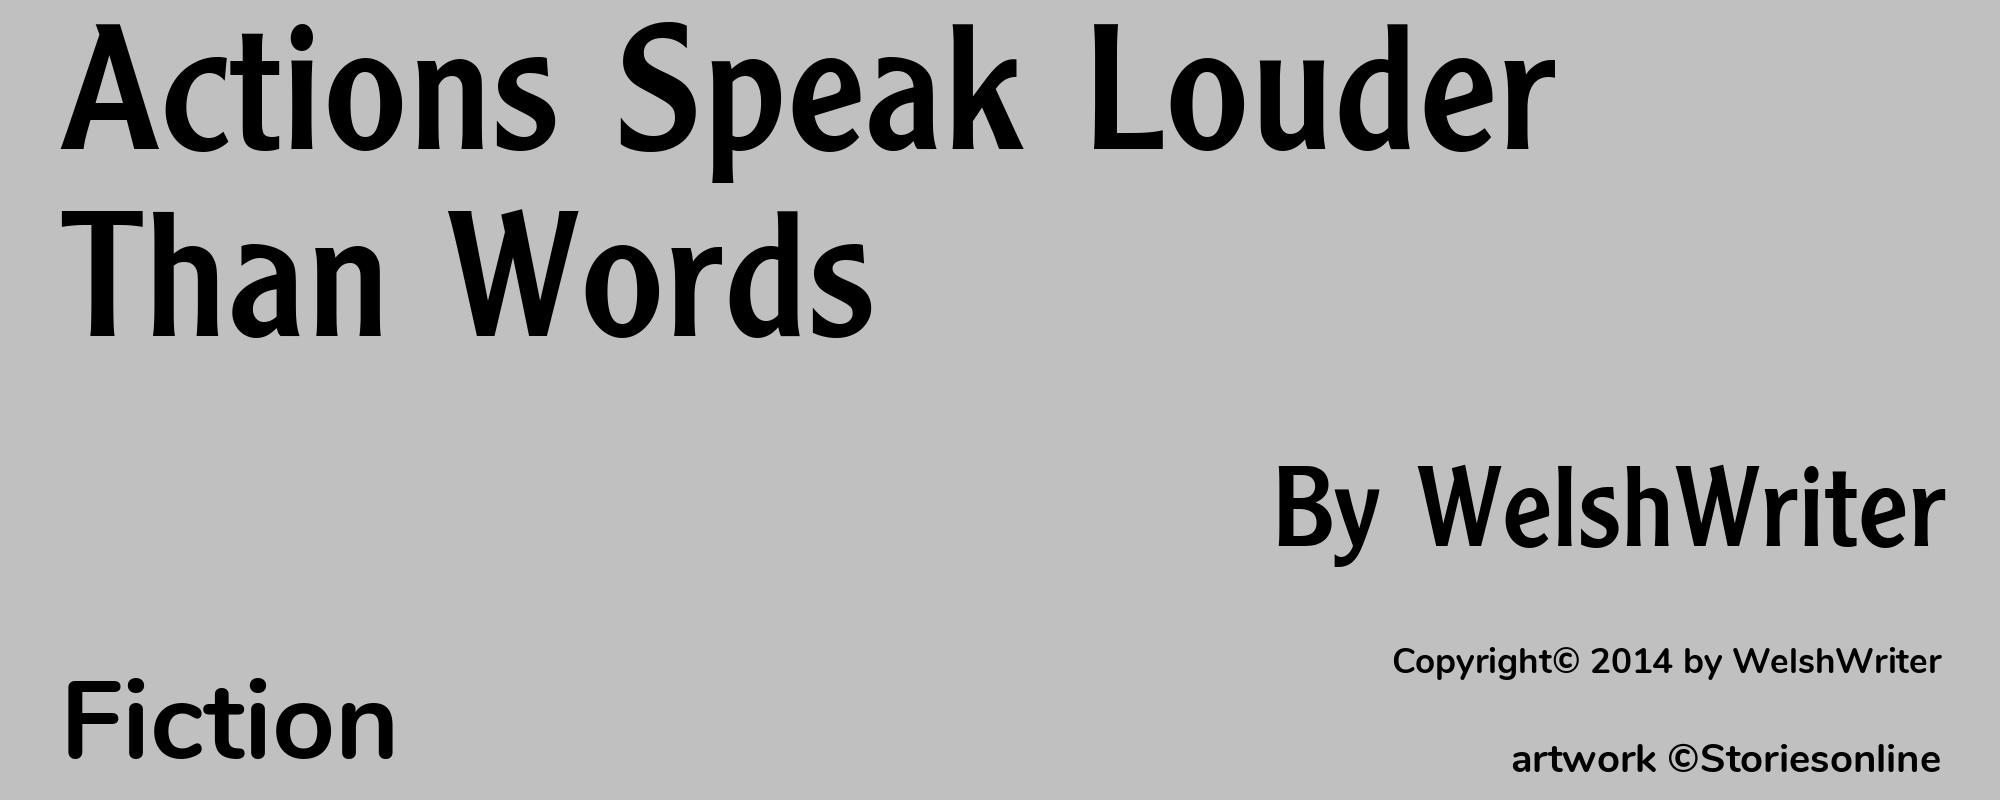 Actions Speak Louder Than Words - Cover